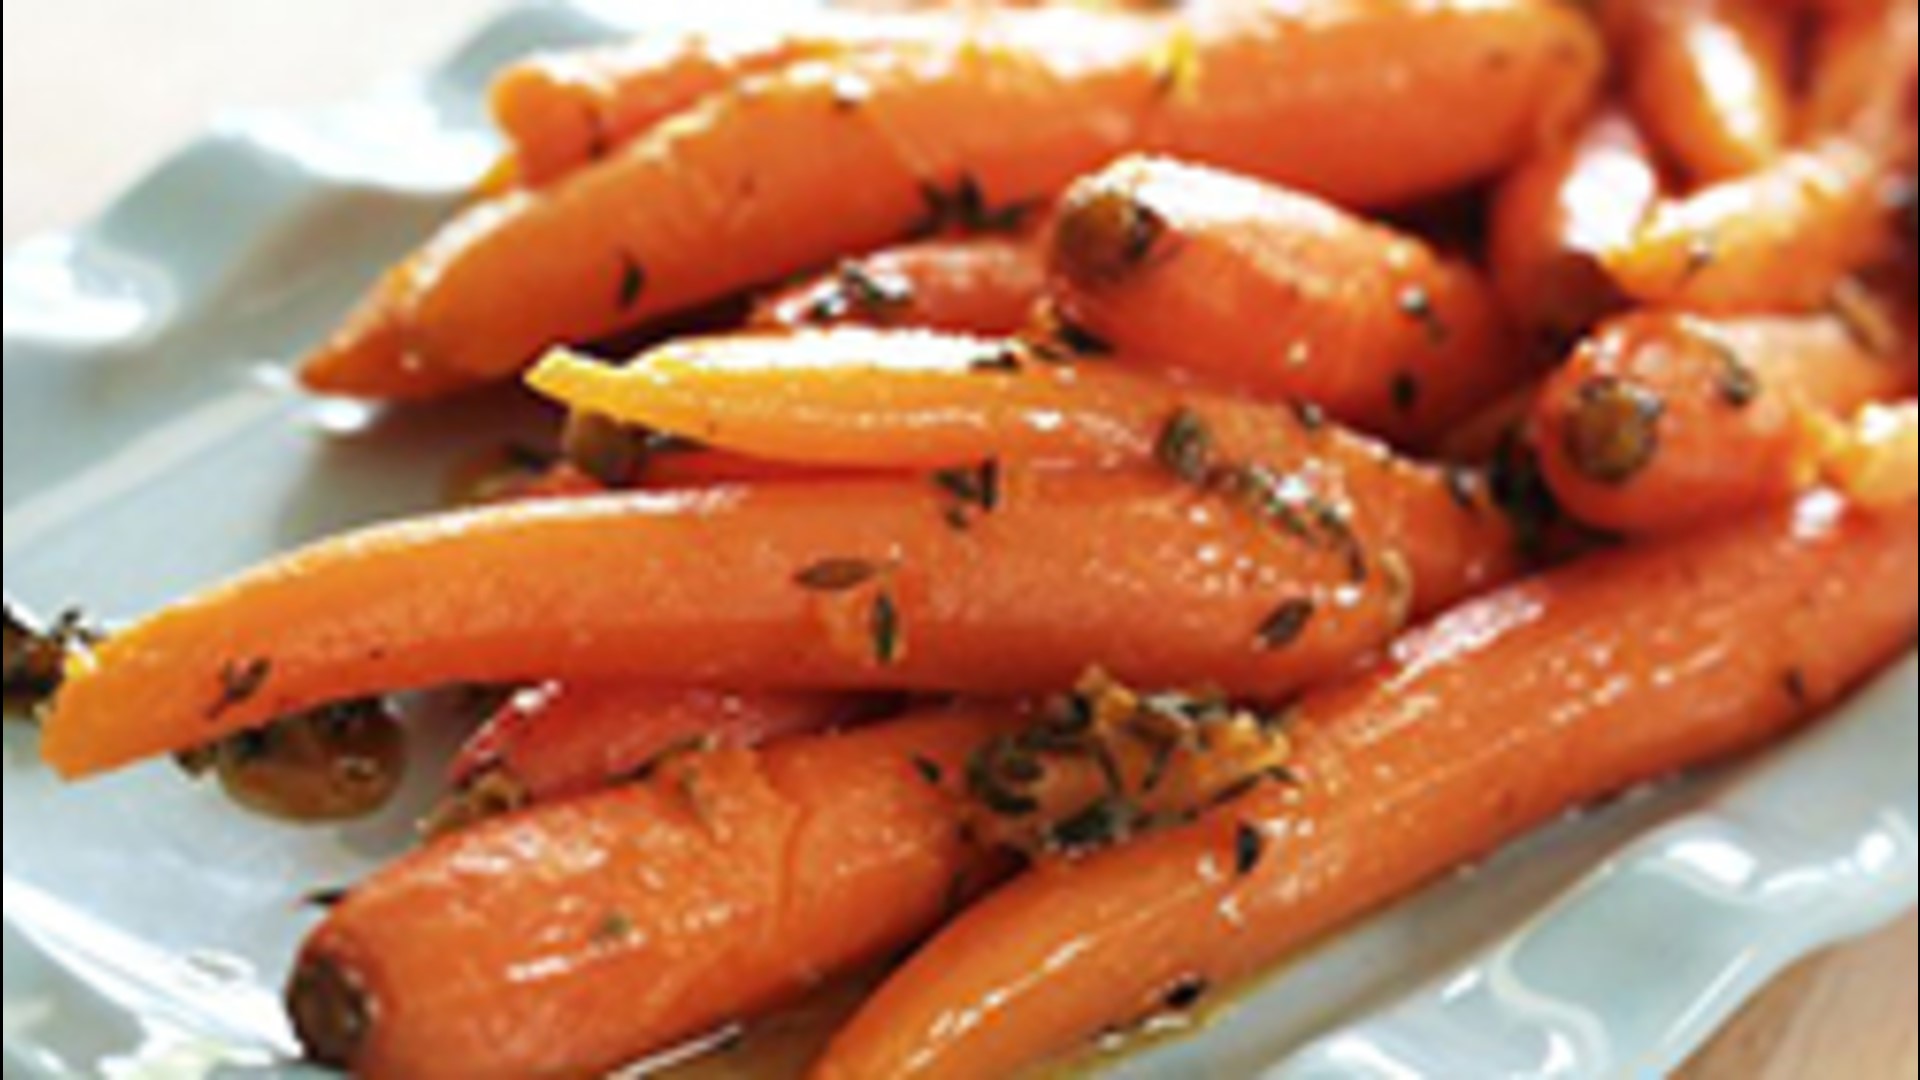 When you need a bright, beautiful side dish with sweet, bold flavors, look no further than these honey glazed carrots. They are such a breeze to whip up and couldn't be more delicious. This recipe really says 'Spring'...we love it!